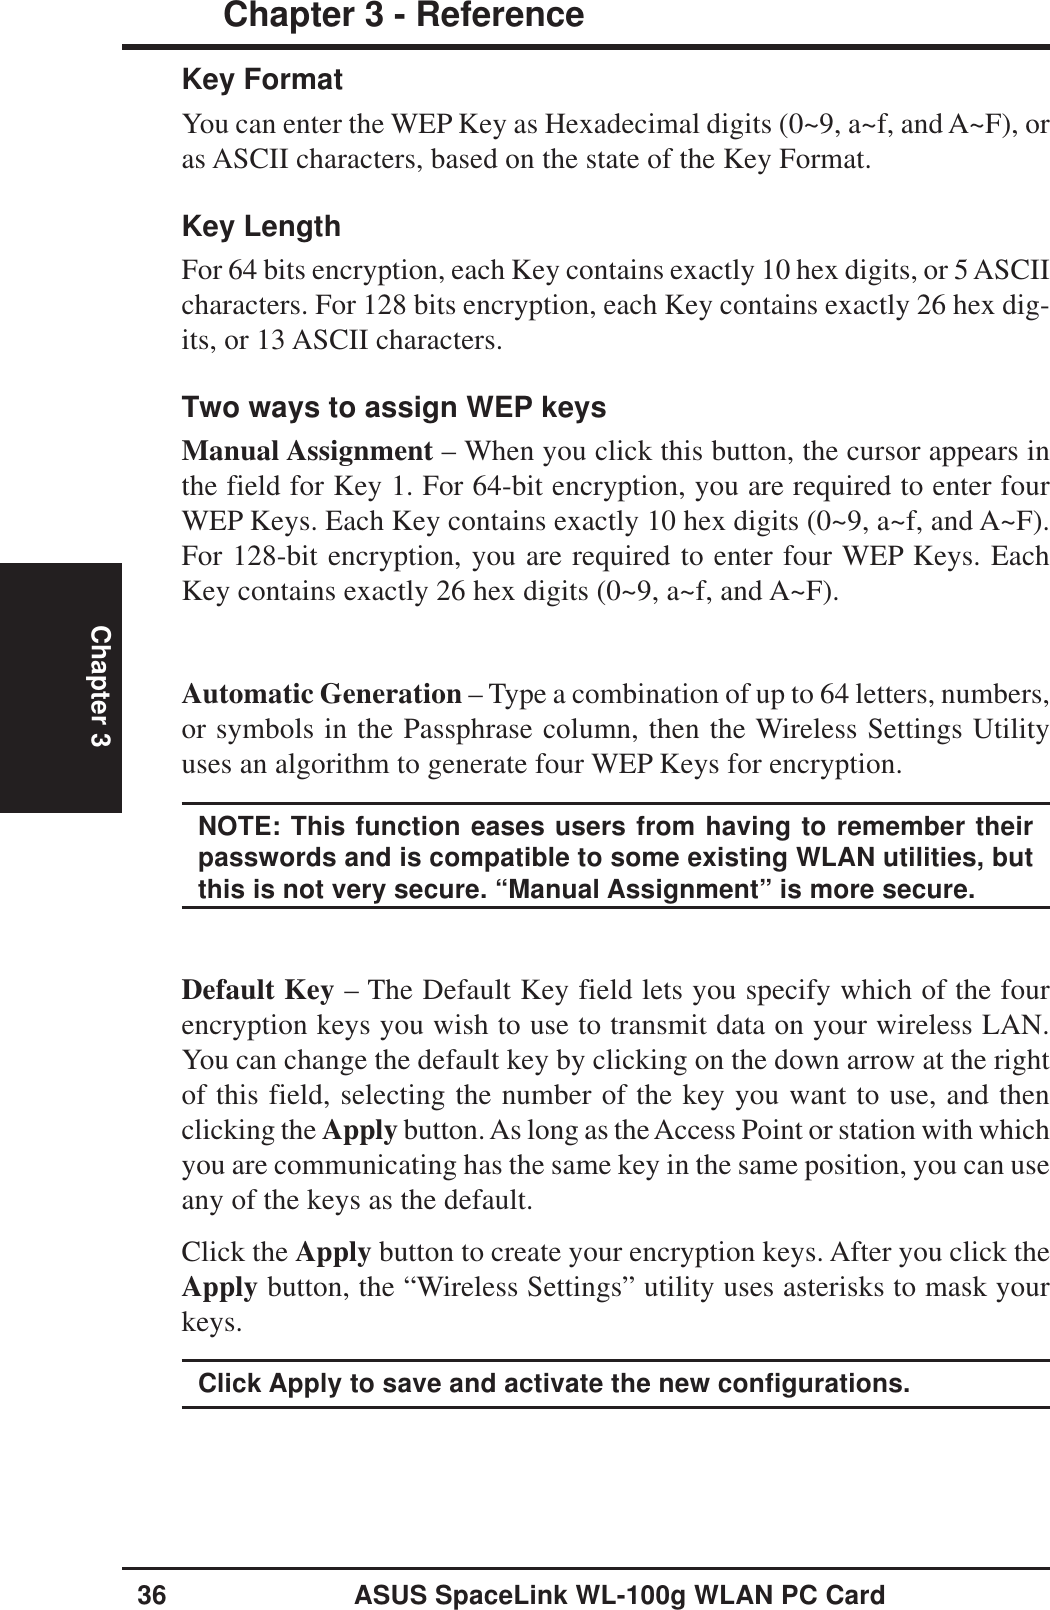 36 ASUS SpaceLink WL-100g WLAN PC CardChapter 3 - ReferenceChapter 3Key FormatYou can enter the WEP Key as Hexadecimal digits (0~9, a~f, and A~F), oras ASCII characters, based on the state of the Key Format.Key LengthFor 64 bits encryption, each Key contains exactly 10 hex digits, or 5 ASCIIcharacters. For 128 bits encryption, each Key contains exactly 26 hex dig-its, or 13 ASCII characters.Two ways to assign WEP keysManual Assignment – When you click this button, the cursor appears inthe field for Key 1. For 64-bit encryption, you are required to enter fourWEP Keys. Each Key contains exactly 10 hex digits (0~9, a~f, and A~F).For 128-bit encryption, you are required to enter four WEP Keys. EachKey contains exactly 26 hex digits (0~9, a~f, and A~F).Automatic Generation – Type a combination of up to 64 letters, numbers,or symbols in the Passphrase column, then the Wireless Settings Utilityuses an algorithm to generate four WEP Keys for encryption.NOTE: This function eases users from having to remember theirpasswords and is compatible to some existing WLAN utilities, butthis is not very secure. “Manual Assignment” is more secure.Default Key – The Default Key field lets you specify which of the fourencryption keys you wish to use to transmit data on your wireless LAN.You can change the default key by clicking on the down arrow at the rightof this field, selecting the number of the key you want to use, and thenclicking the Apply button. As long as the Access Point or station with whichyou are communicating has the same key in the same position, you can useany of the keys as the default.Click the Apply button to create your encryption keys. After you click theApply button, the “Wireless Settings” utility uses asterisks to mask yourkeys.Click Apply to save and activate the new configurations.